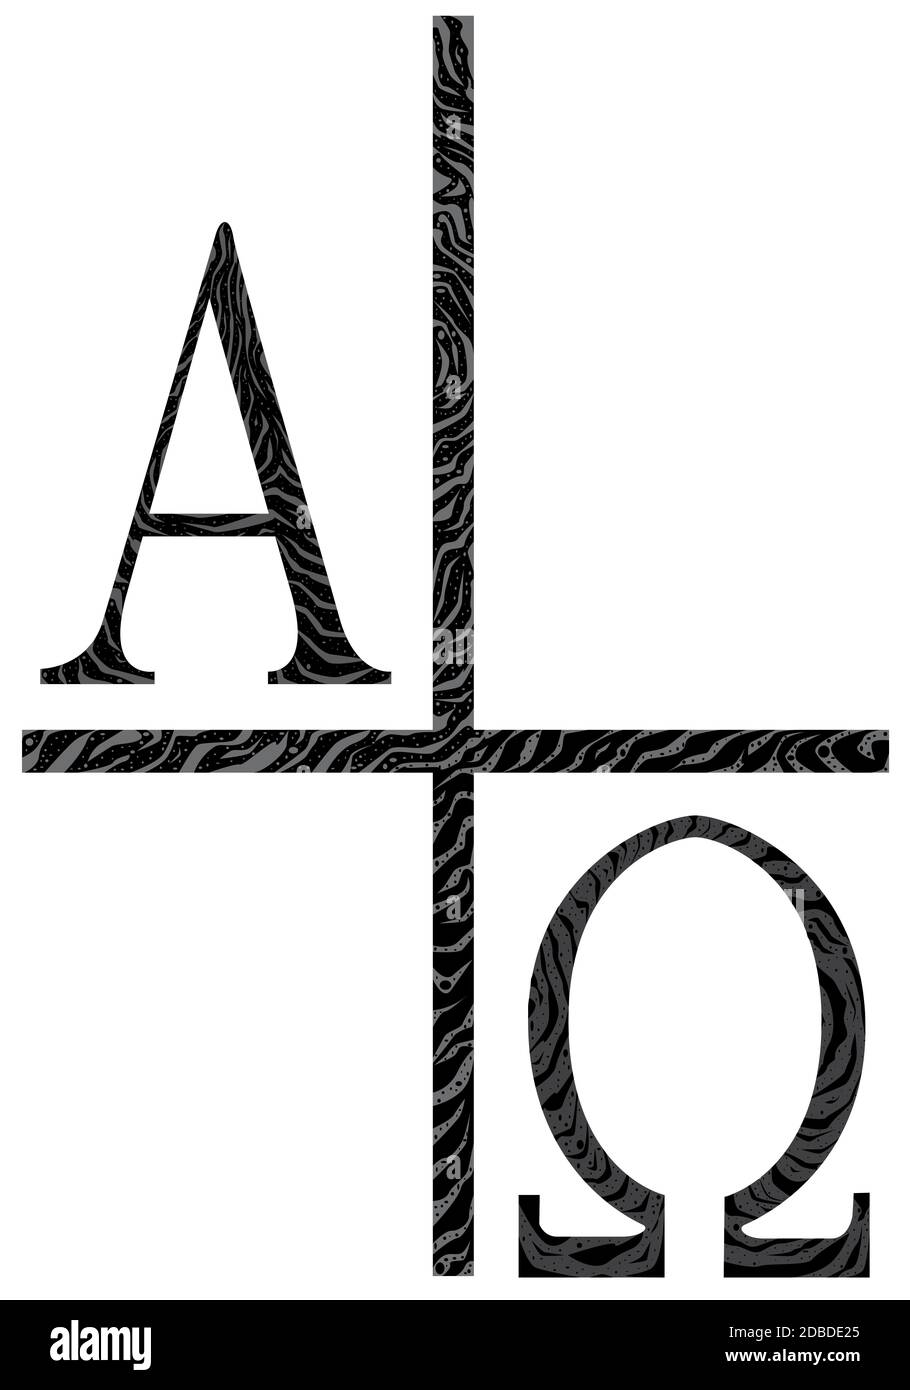 The A;phs Omega letters from the Greek alphabet. Stock Photo